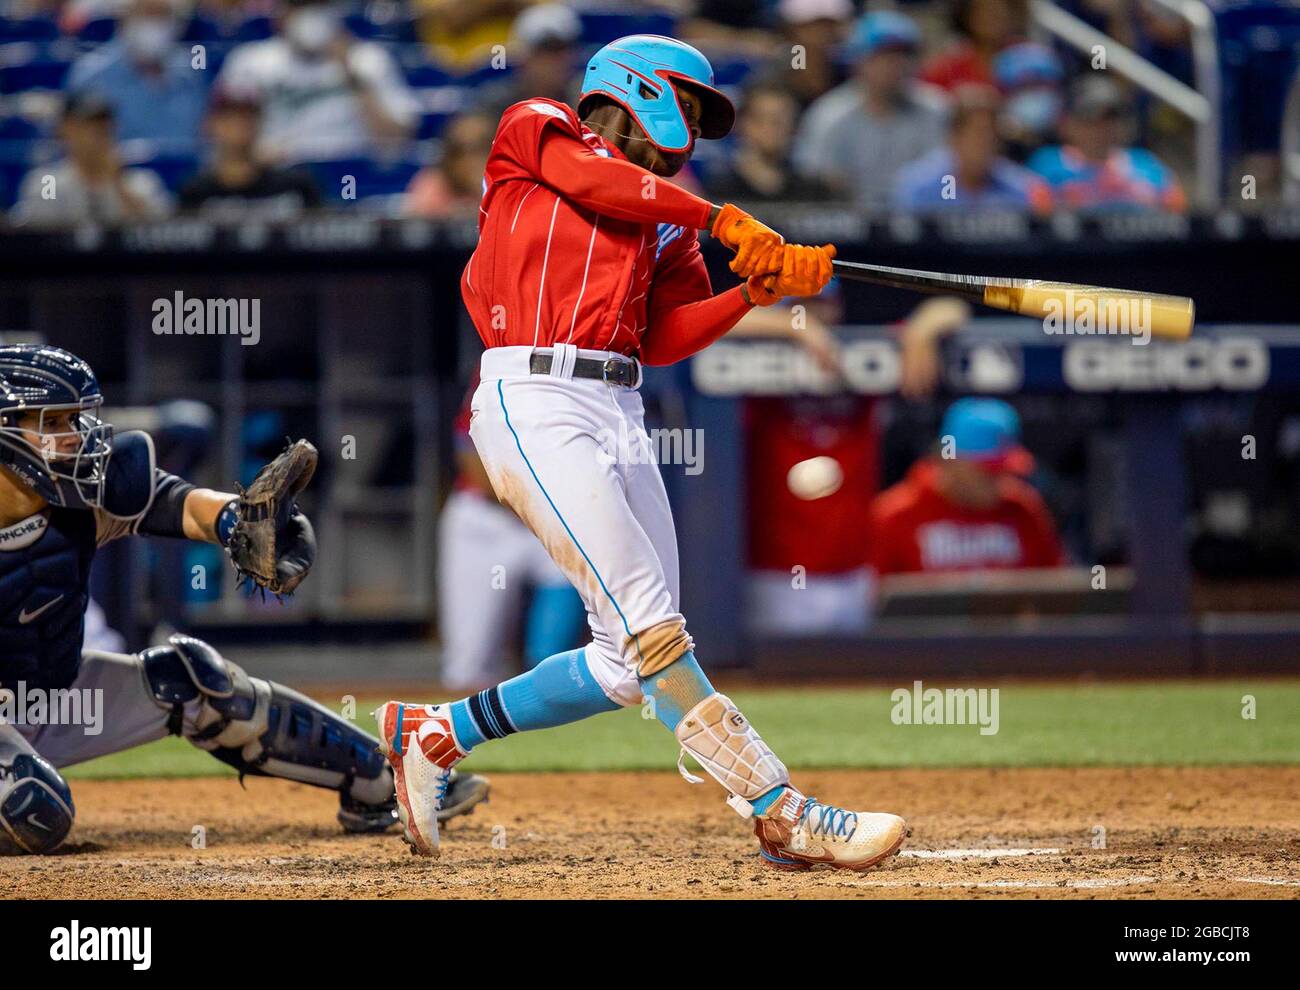 Jazz Chisholm Jr. #2 of the Miami Marlins prepares to bat in the